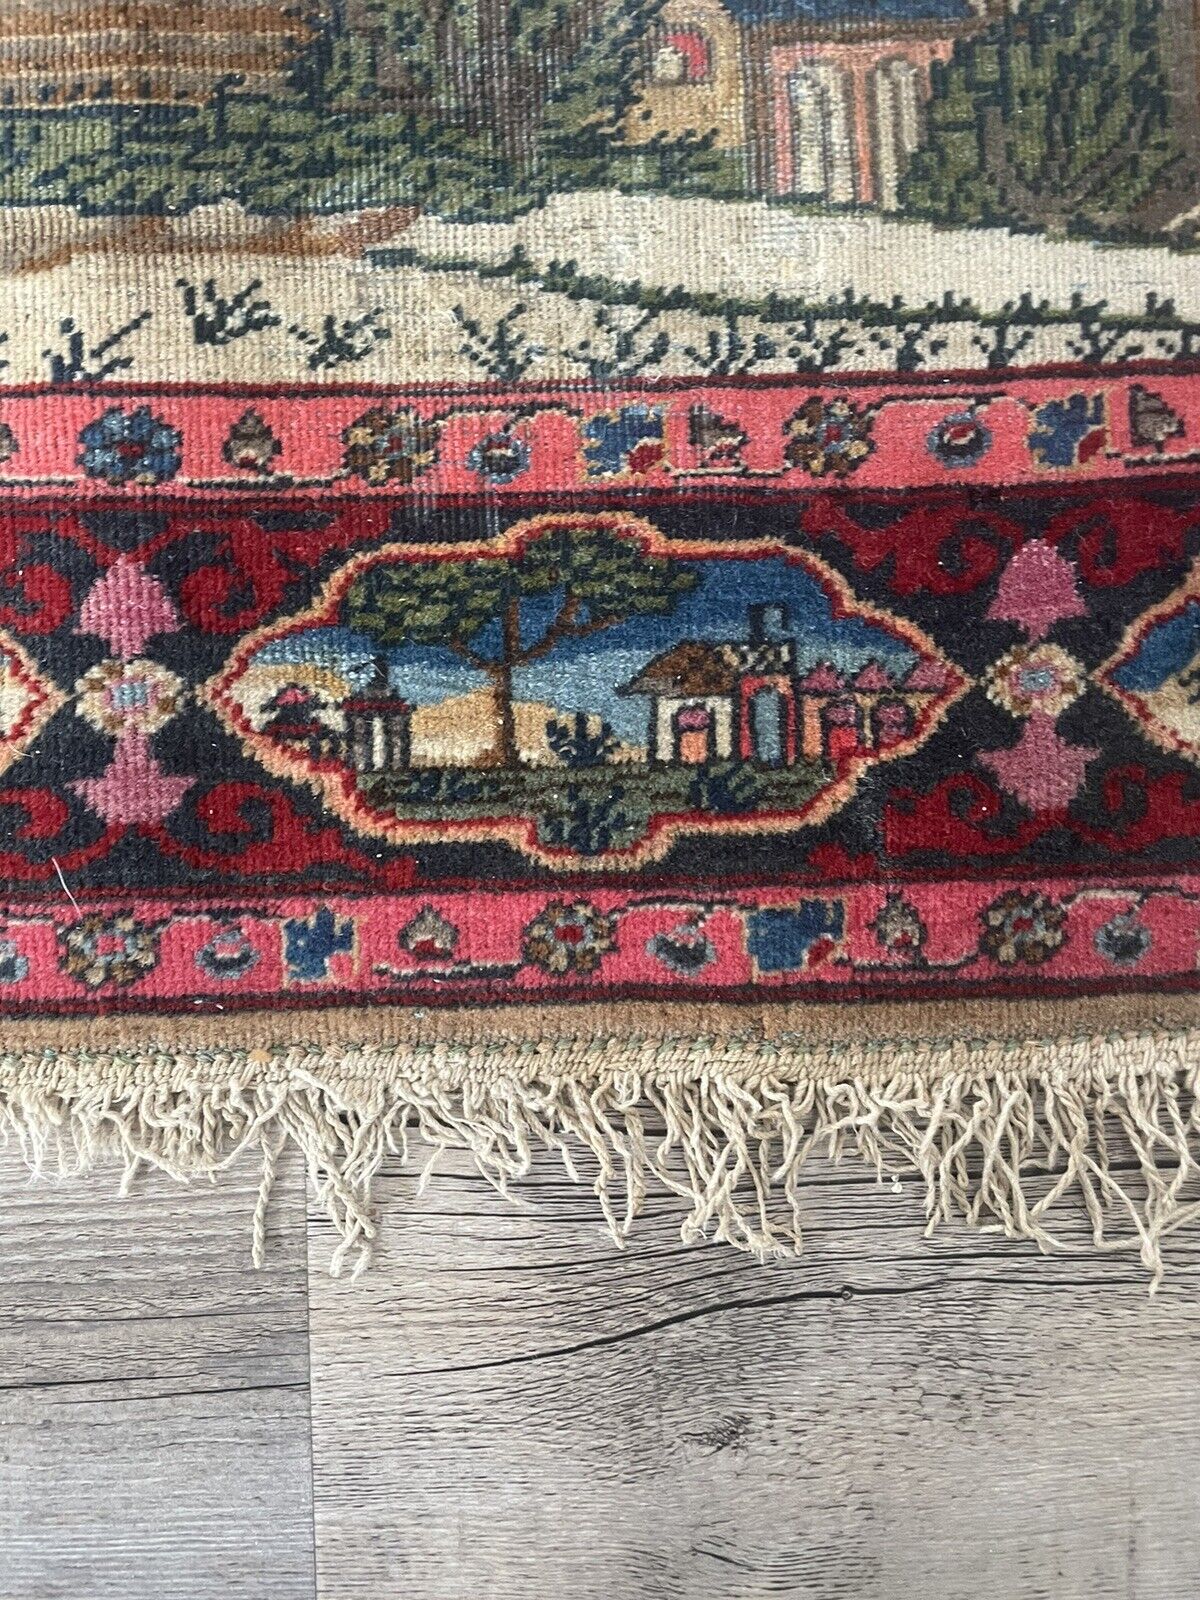 Close-up of color palette on Handmade Antique Persian Kashan Collectible Rug - Detailed view showcasing the rich color palette of the rug, including red, blue, and cream tones.